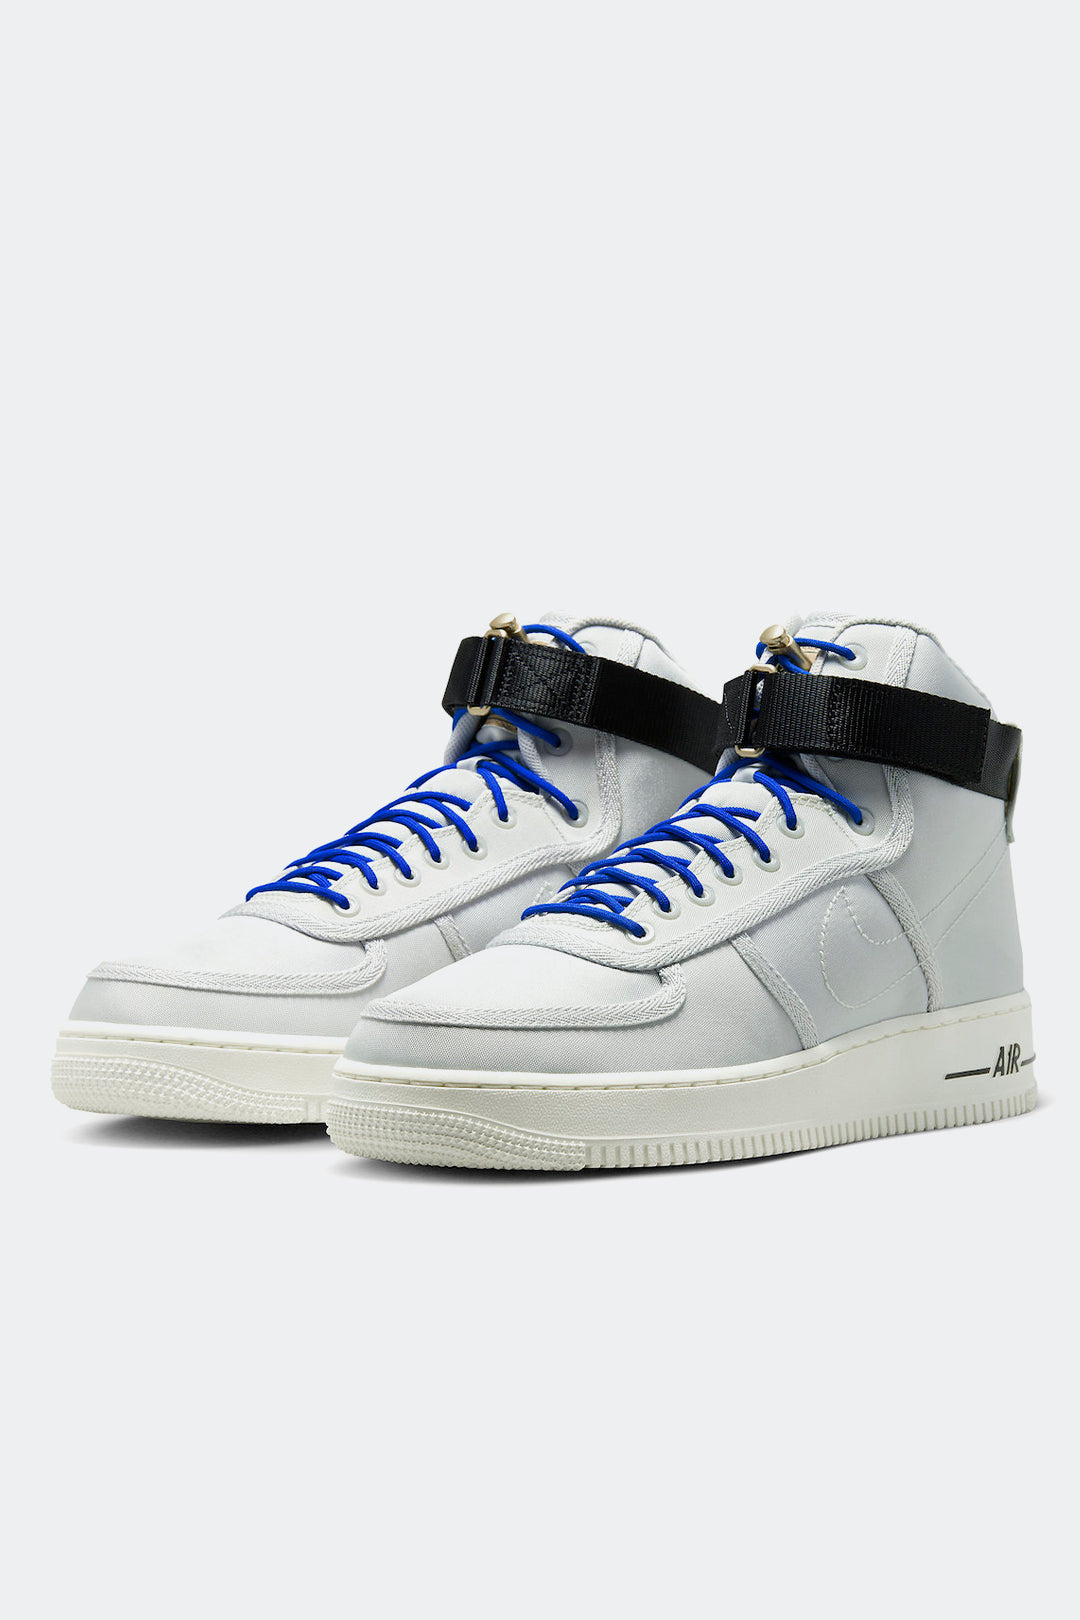 NIKE AIR FORCE 1 HIGH '07 LV8 "MOVING COMPANY" - HYPE